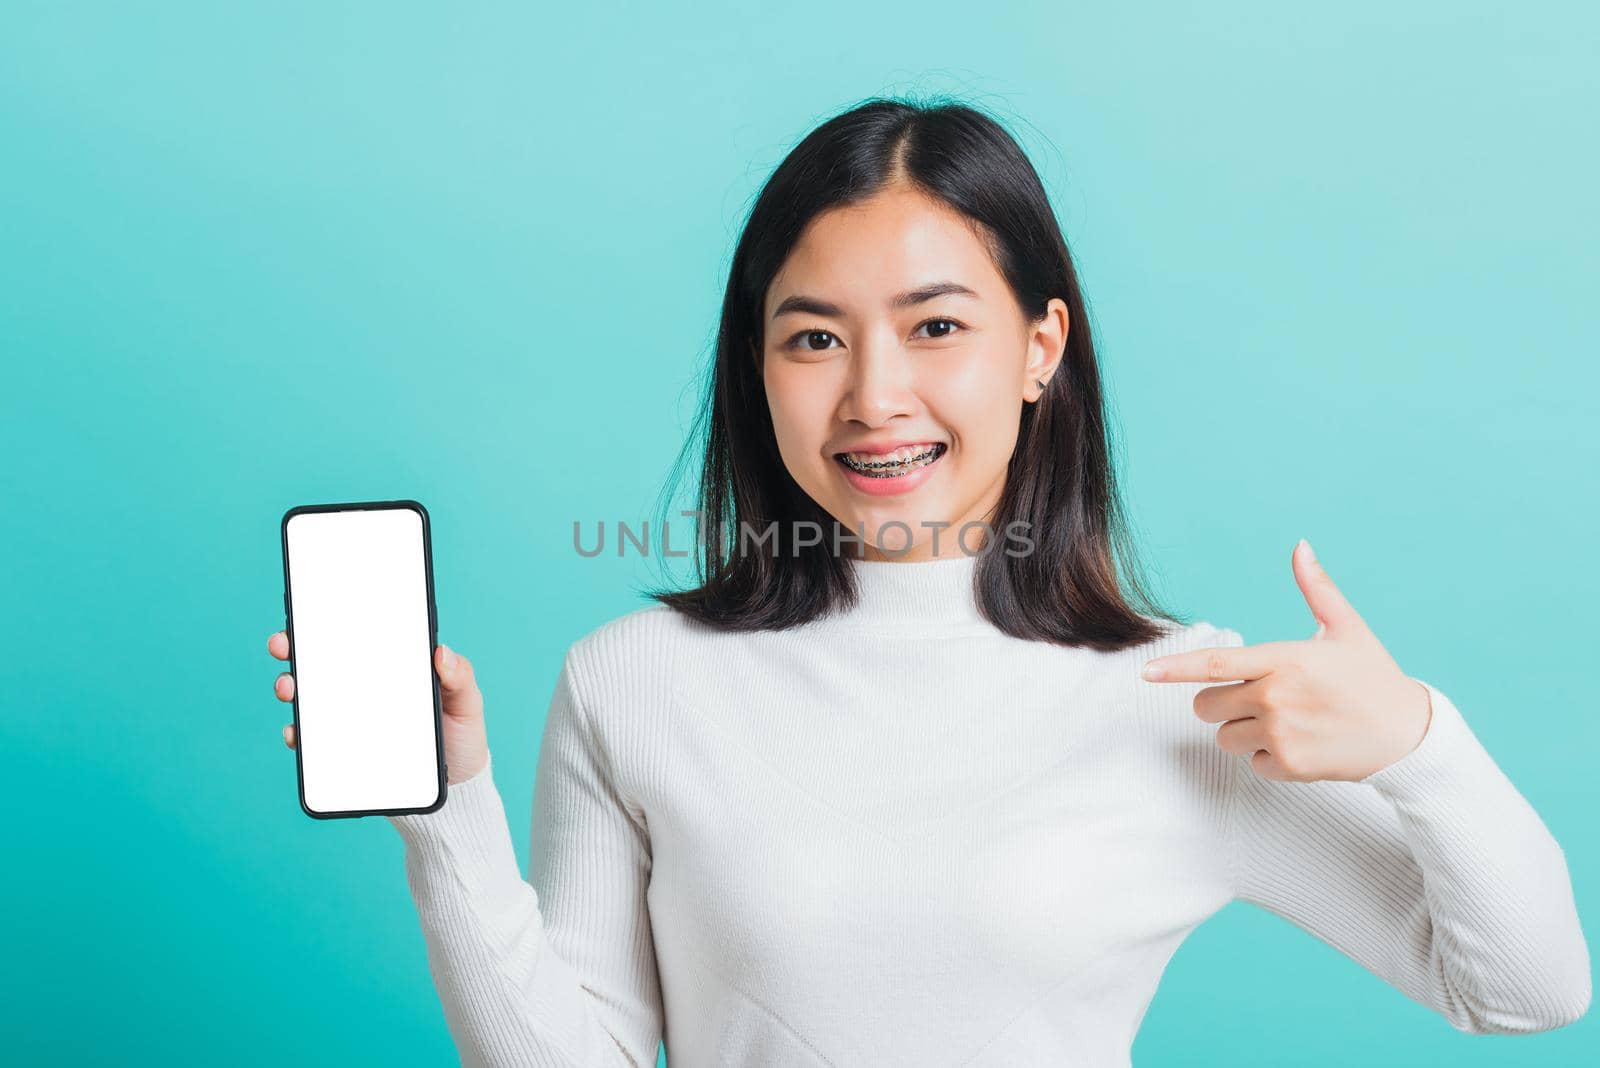 woman smile holding a smartphone on hand and pointing finger to the blank screen by Sorapop